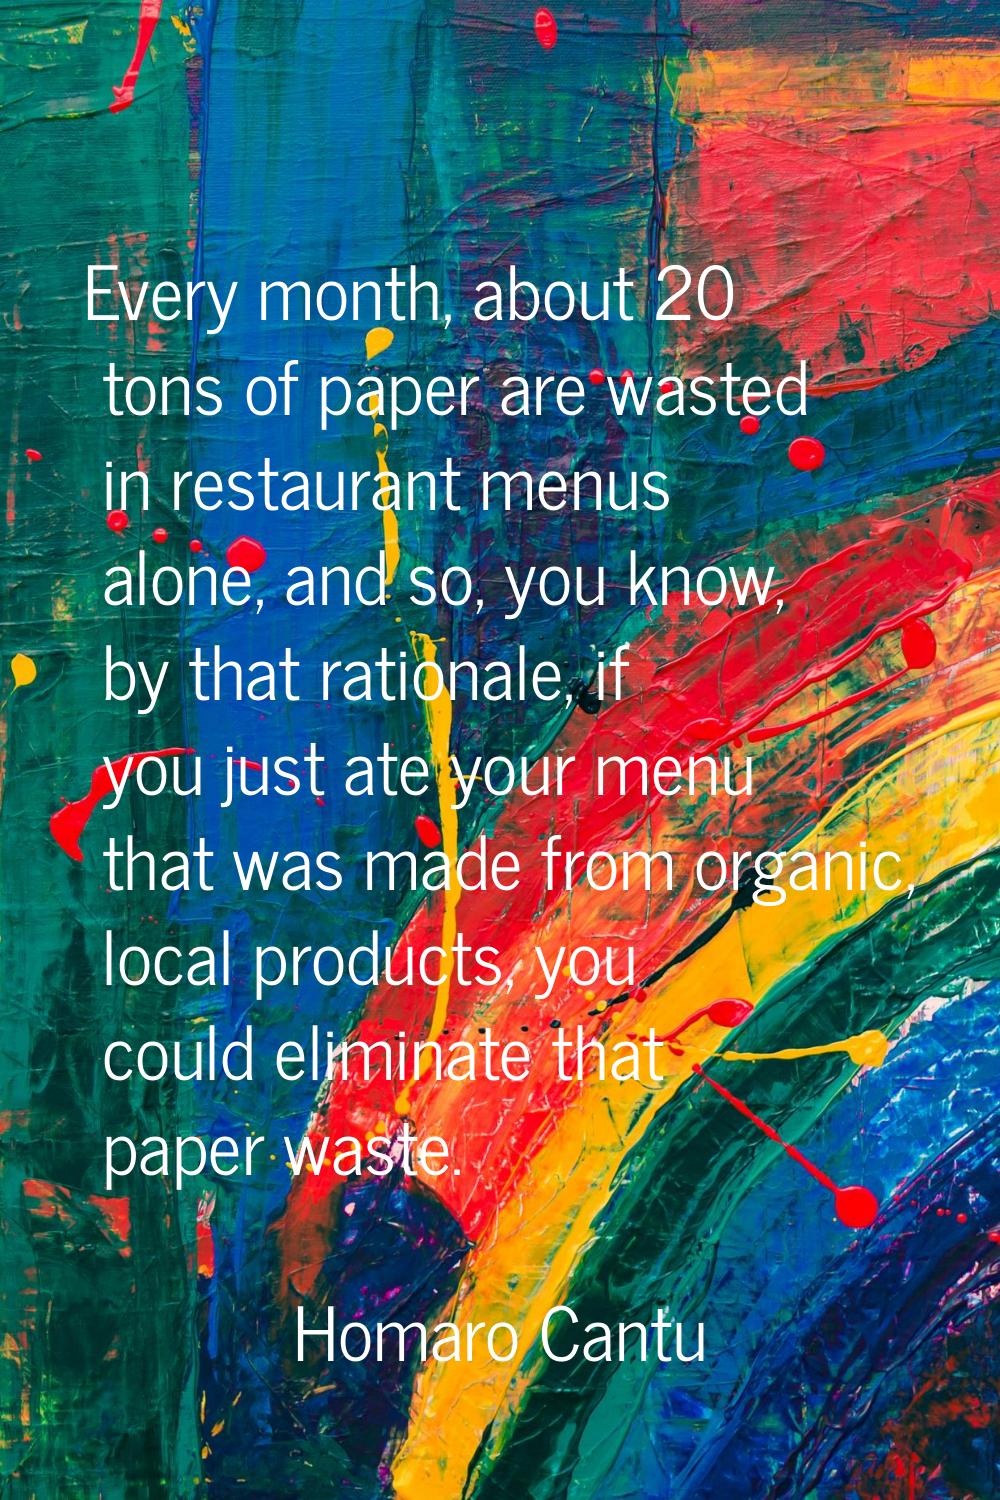 Every month, about 20 tons of paper are wasted in restaurant menus alone, and so, you know, by that